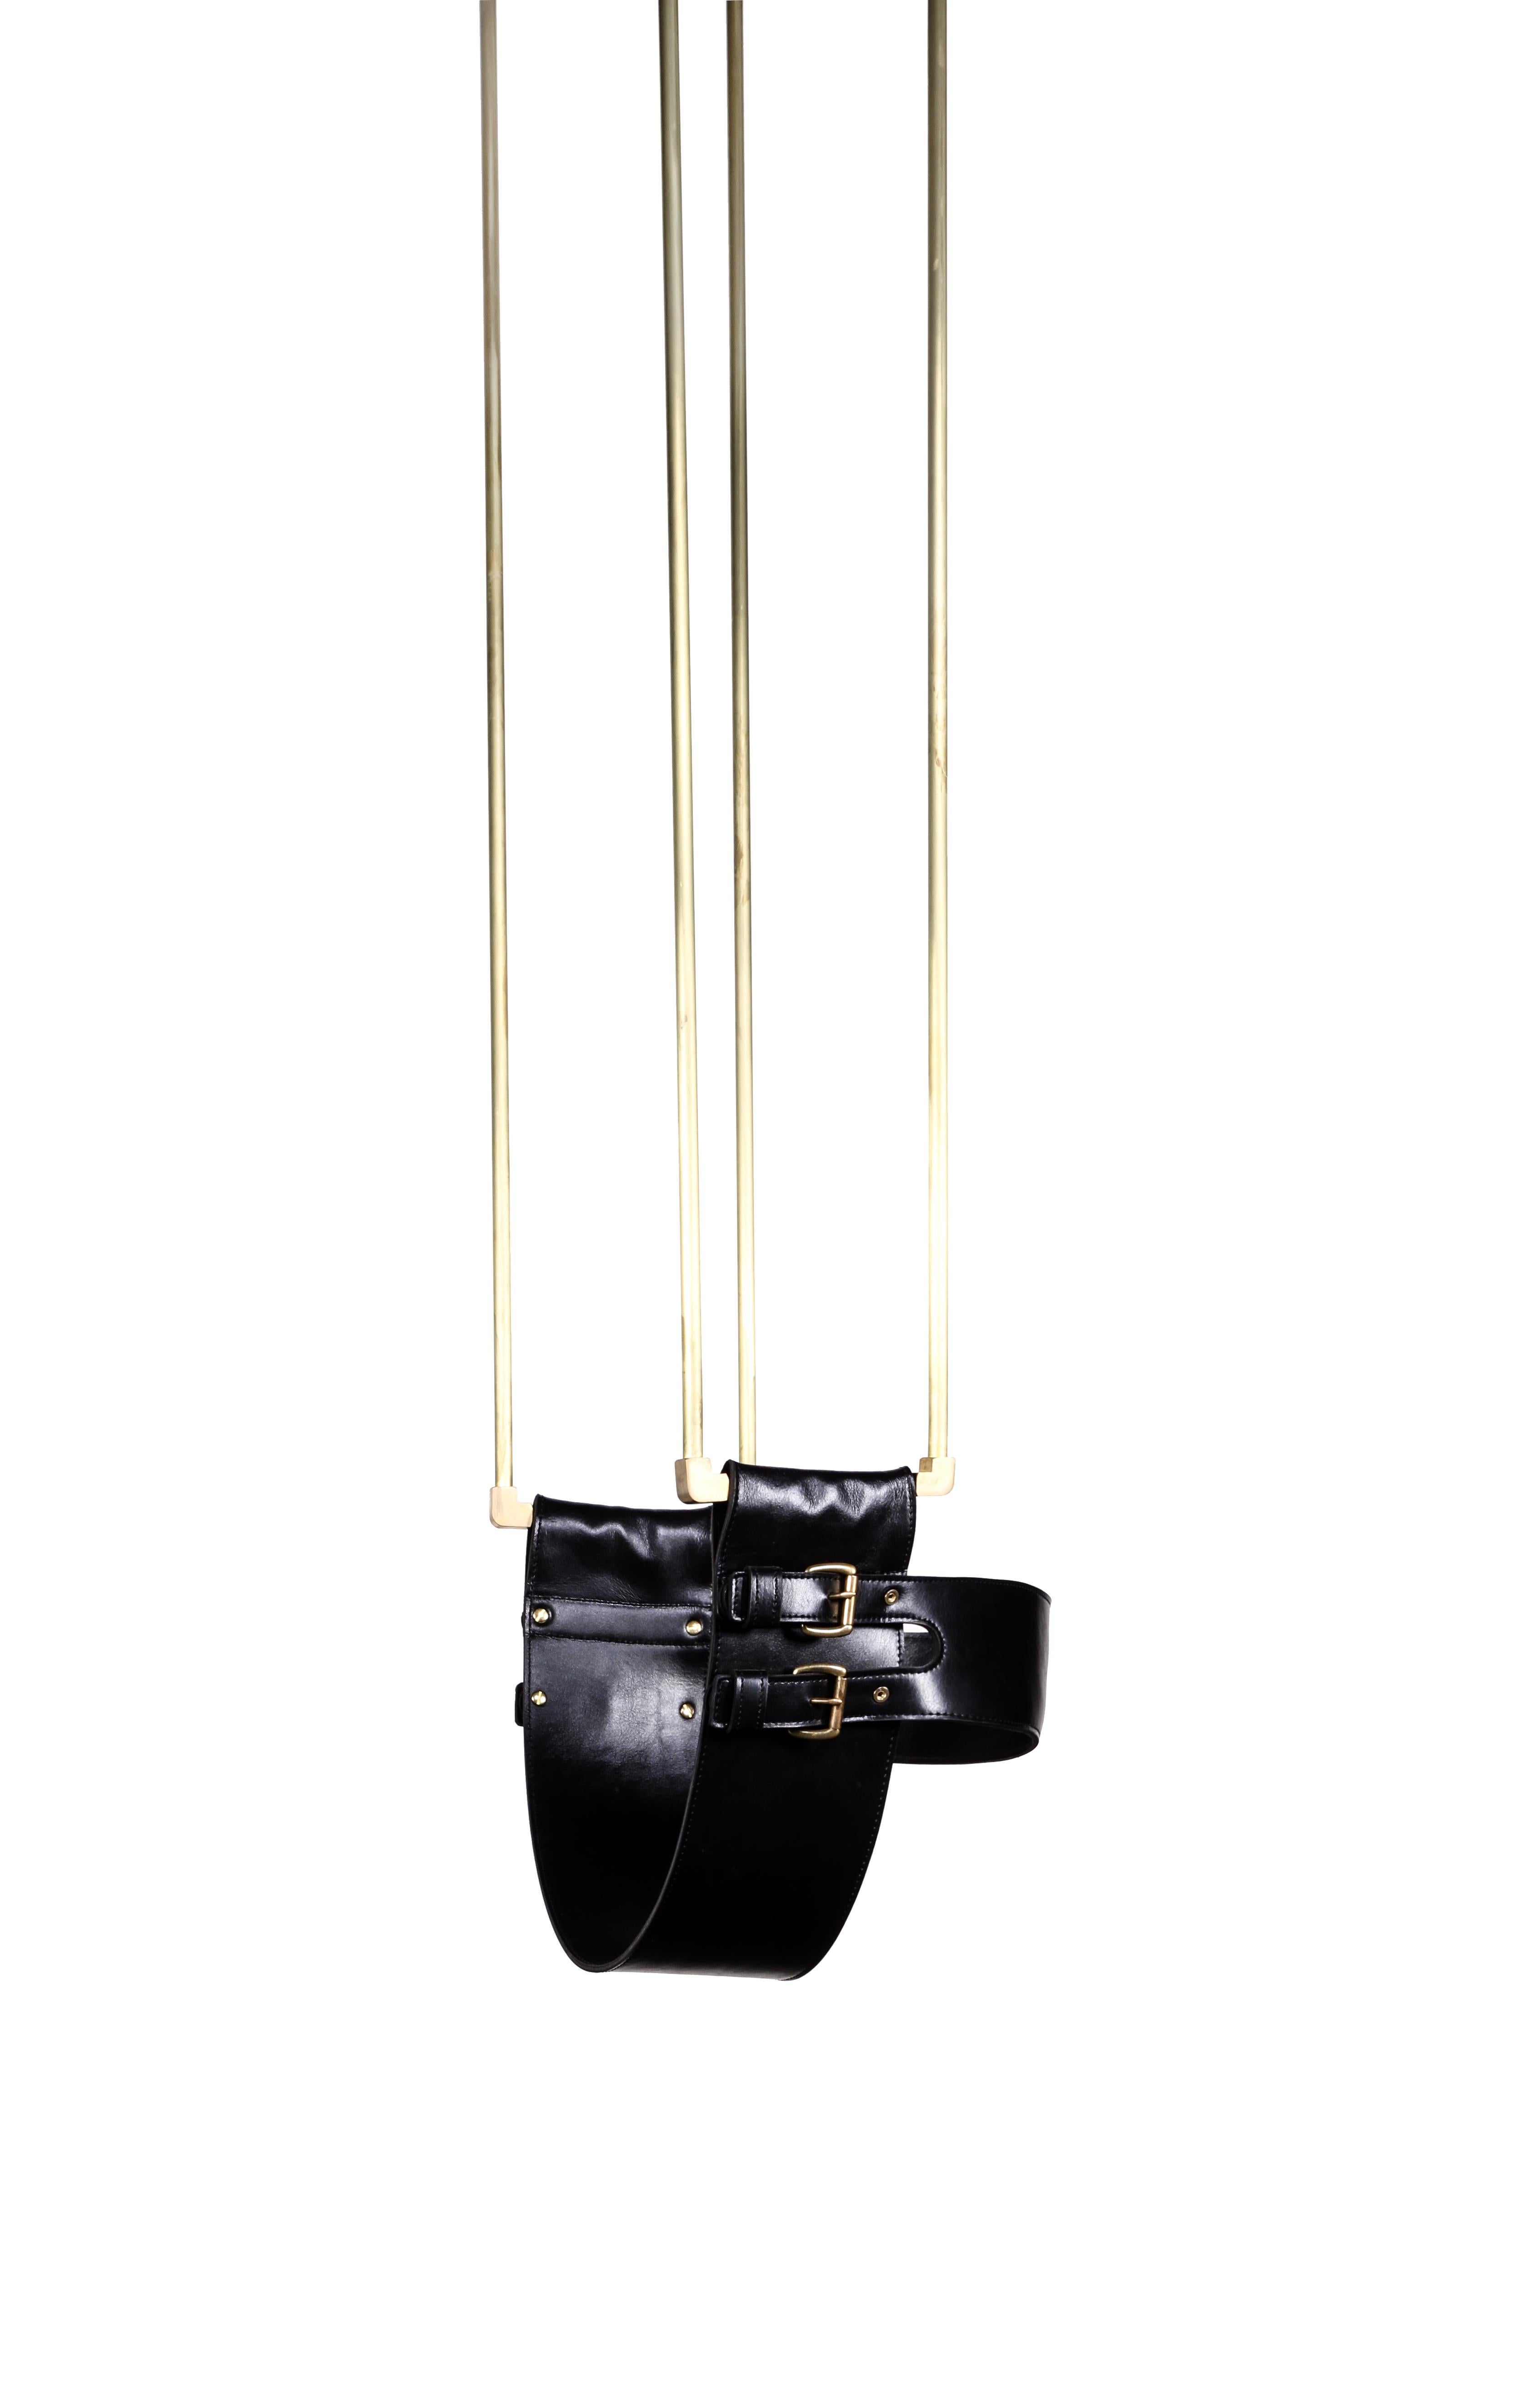 Leather Free Standing Swing Set

12’W x 6”D x 100”H

Finish: Steel frame with brass finish

Made to Order

(wh)ORE HAüS STUDIOS is a female run and operated design studio based in Downtown Los Angeles. Founded by a former fashion model who